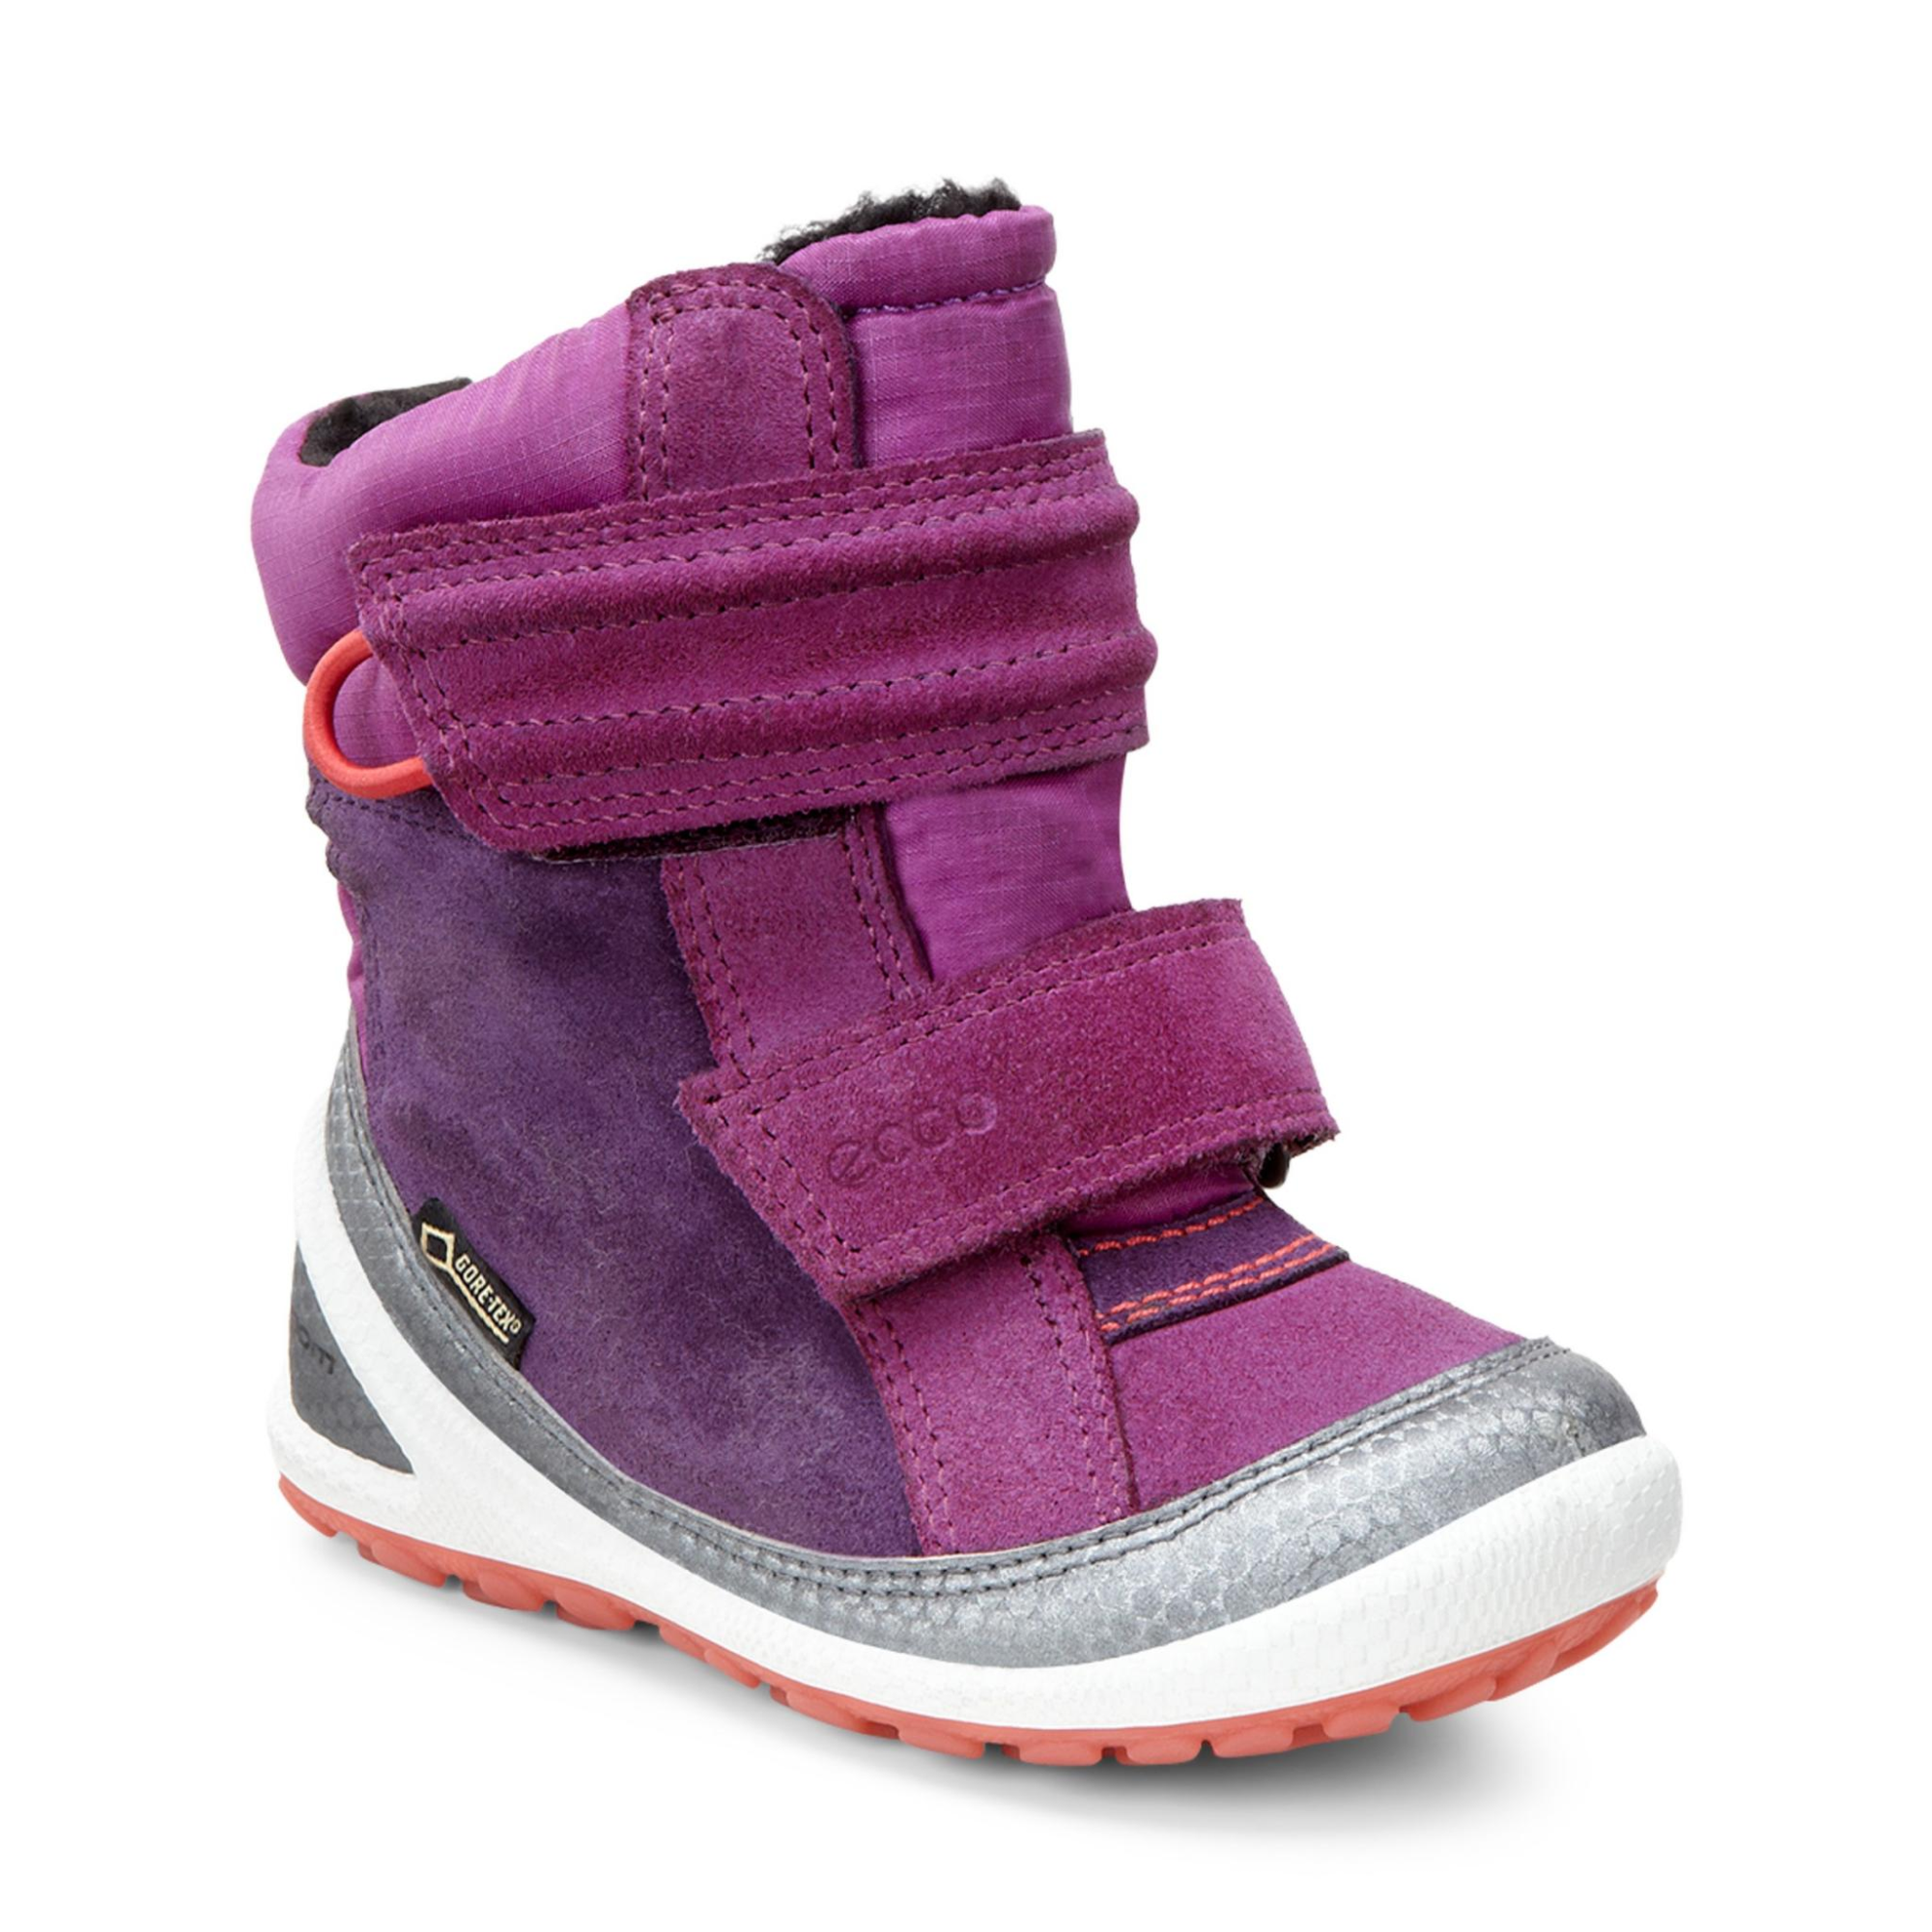 Ecco BIOM Lite Infant Boot 22 - Products - Veryk Mall Veryk Mall, many product, response, your money!